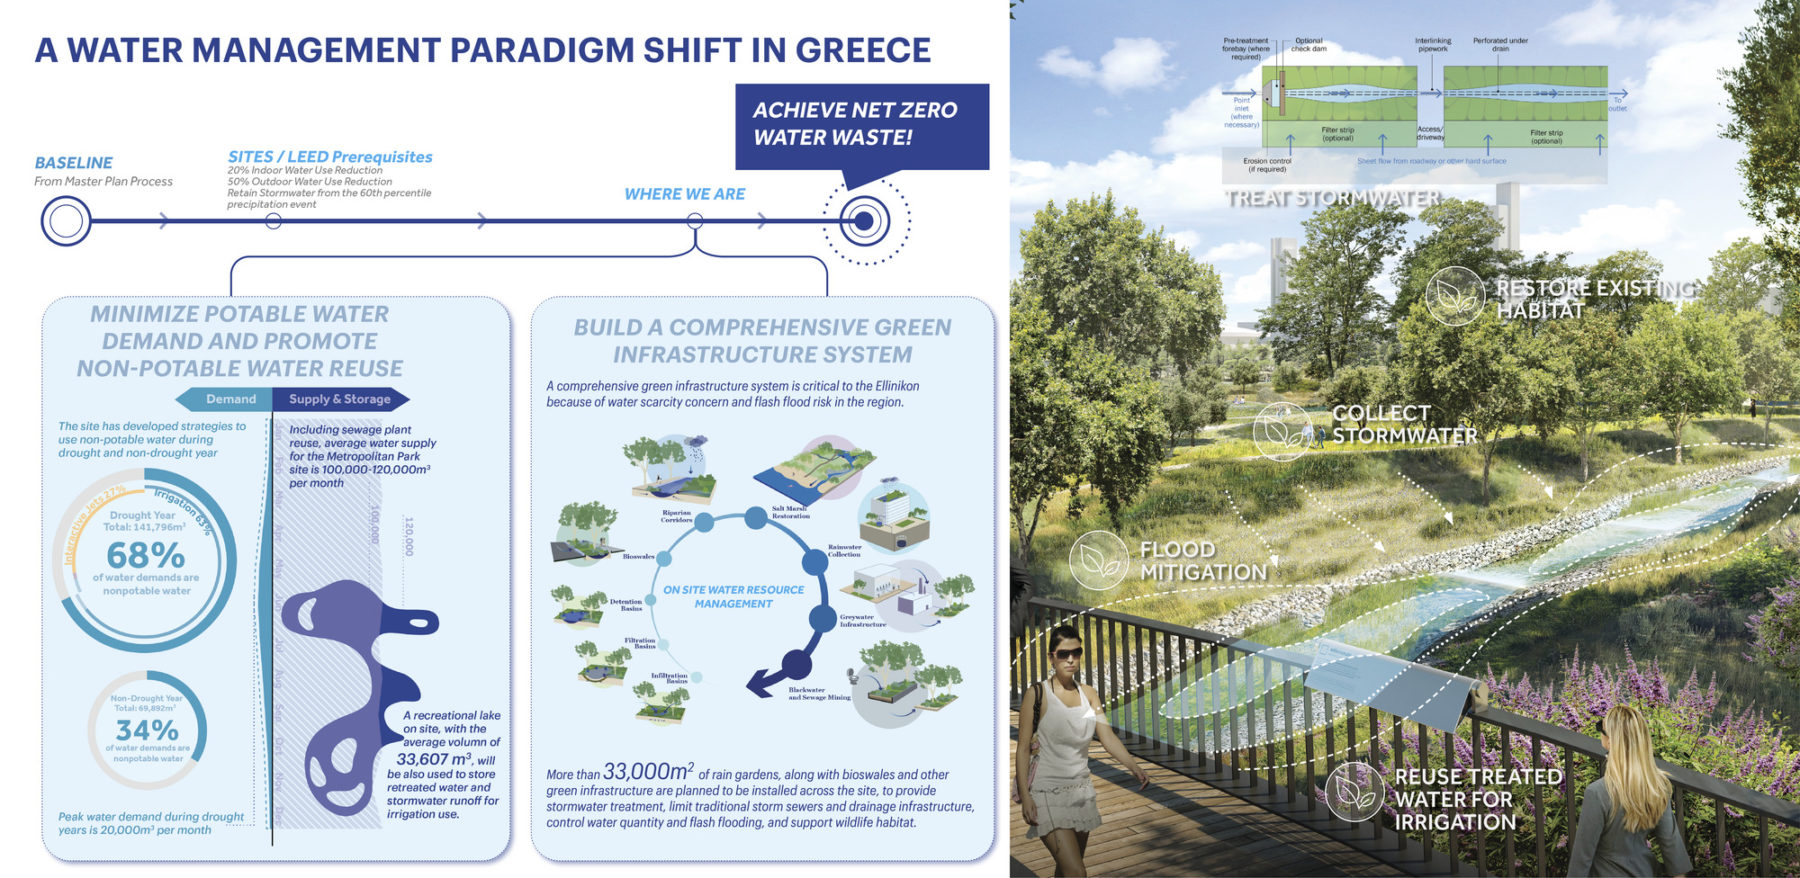 Diagram of the park's water management strategy. On the right an annotated rendering with water mitigation strategies. On the left a timeline and callouts for how to achieve net zero water waste. Image title reads: 